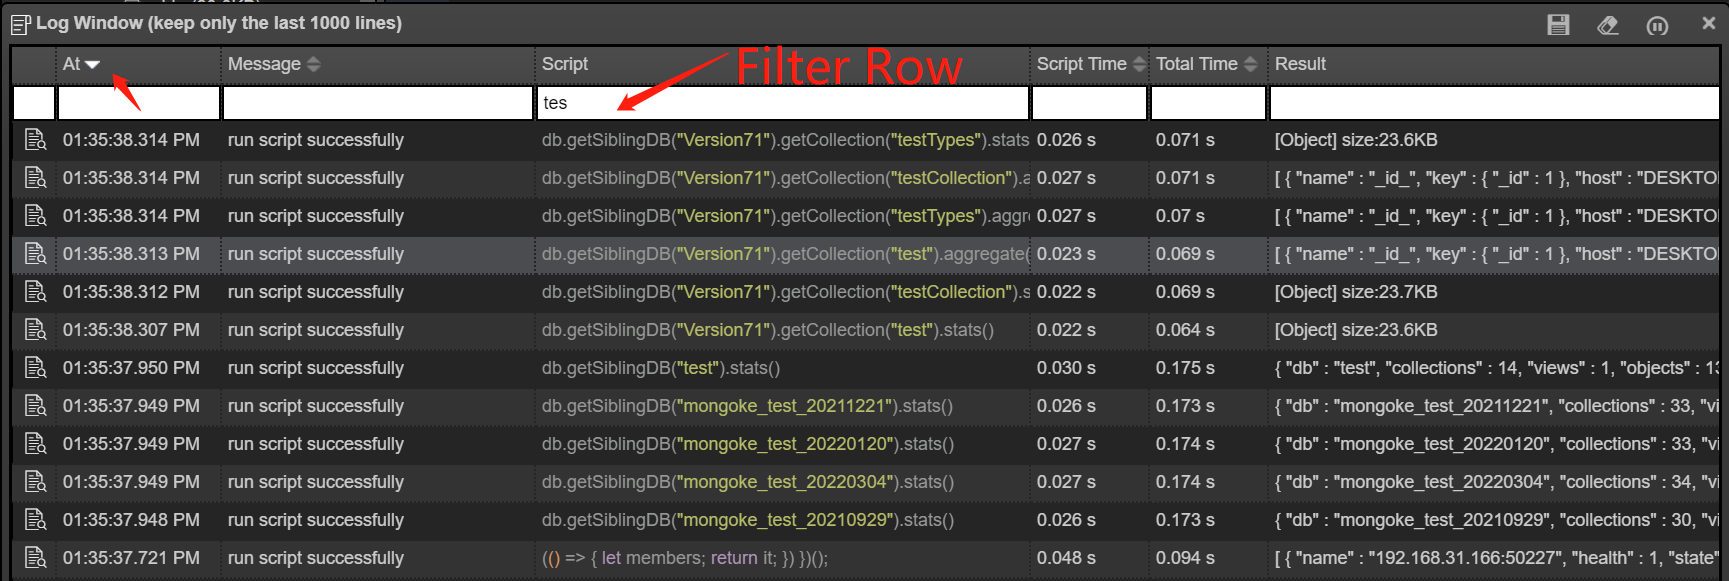 Log Window with Filter Row